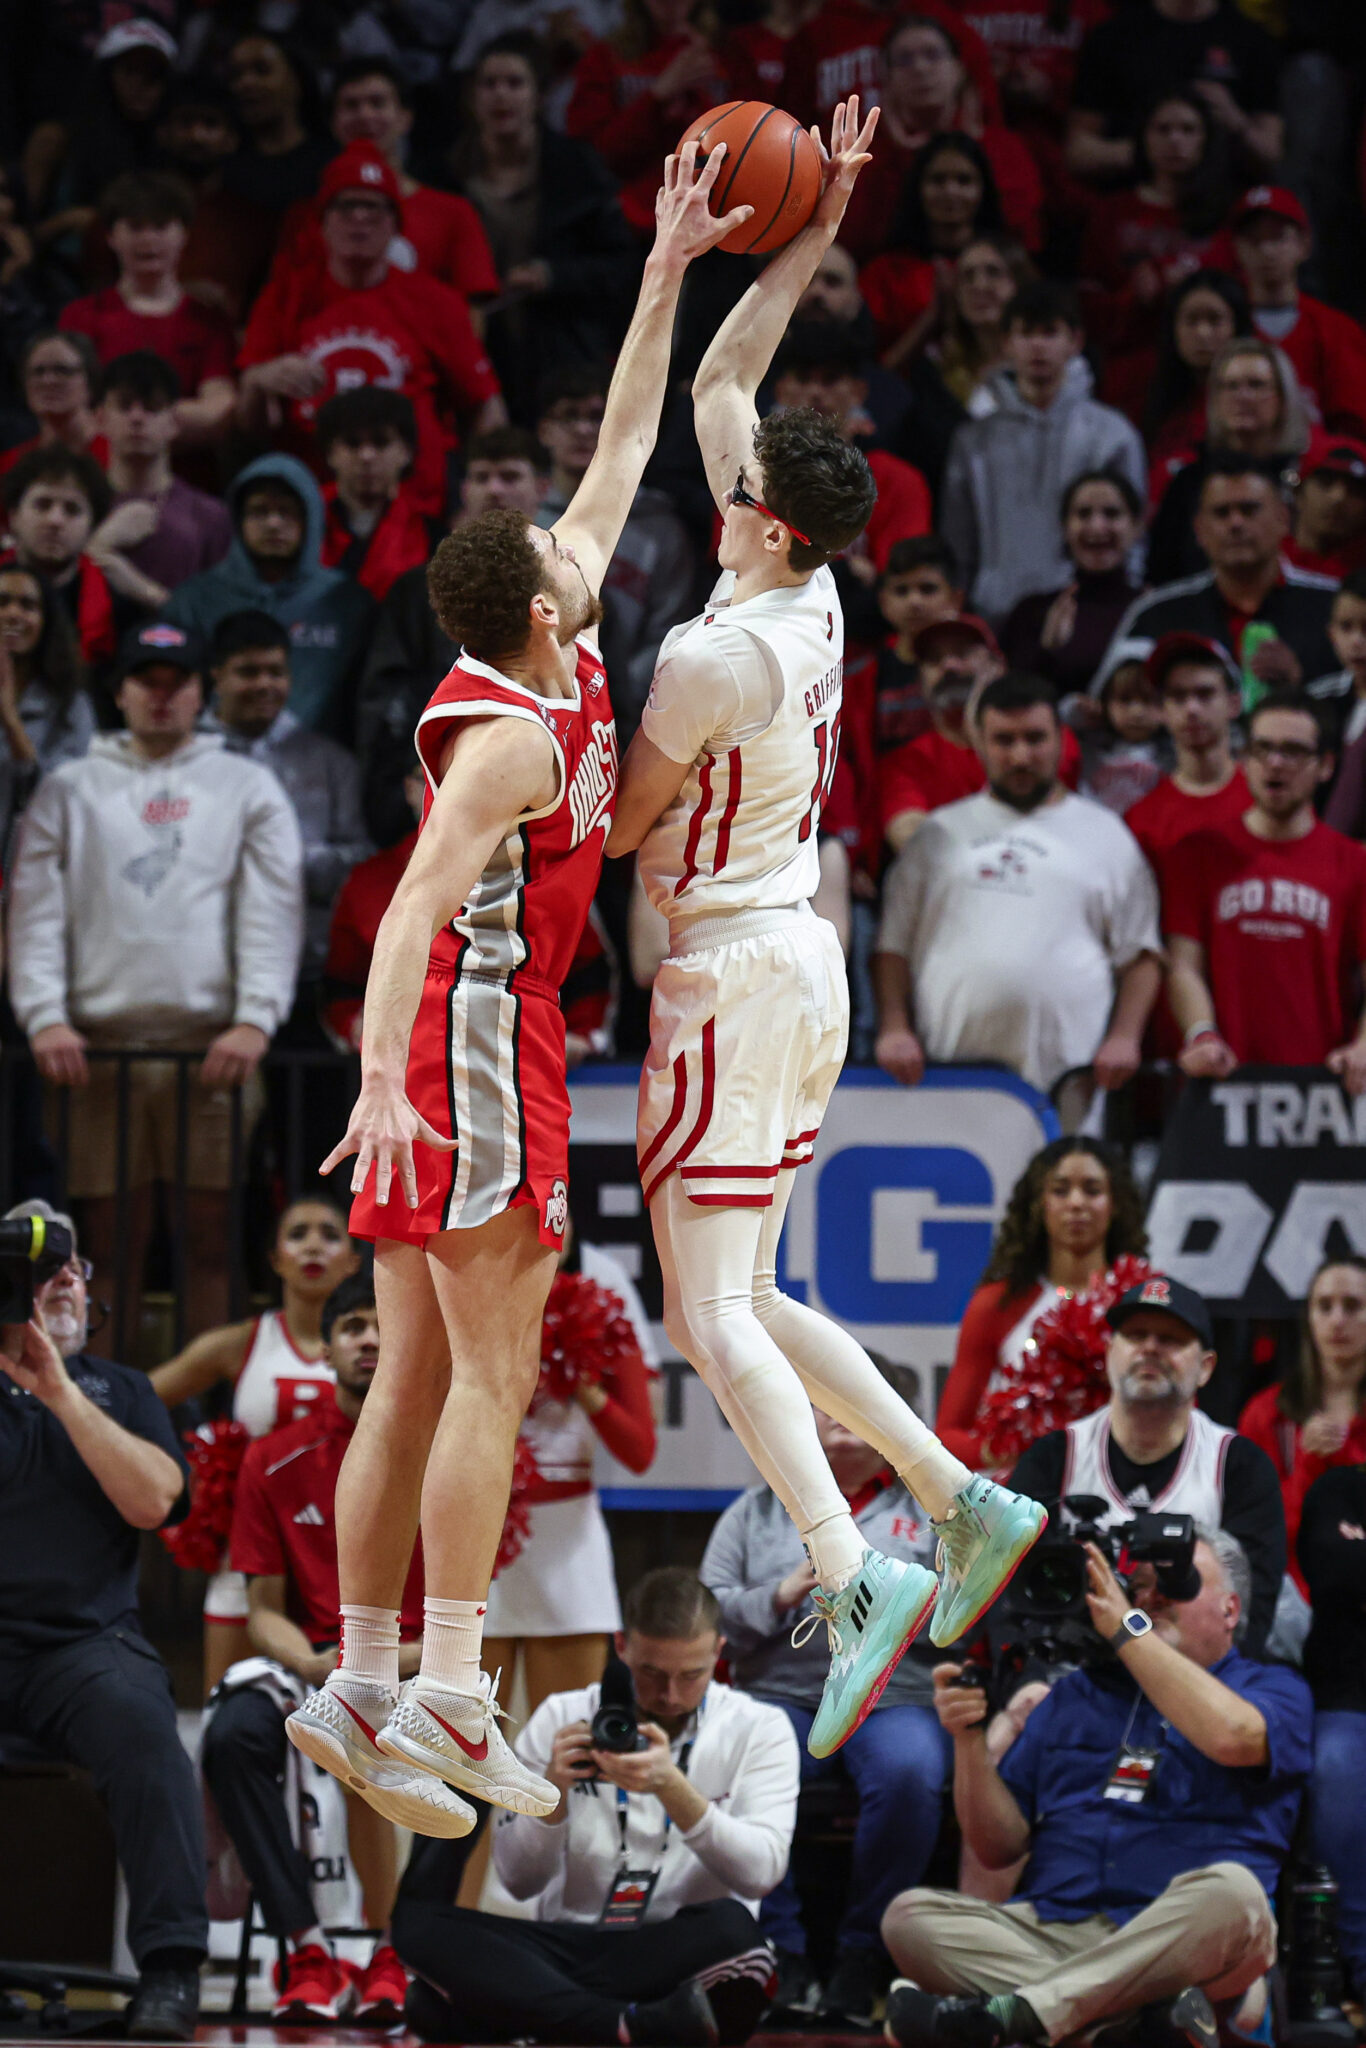 Ohio State basketball crushes Rutgers to keep March Madness hopes alive